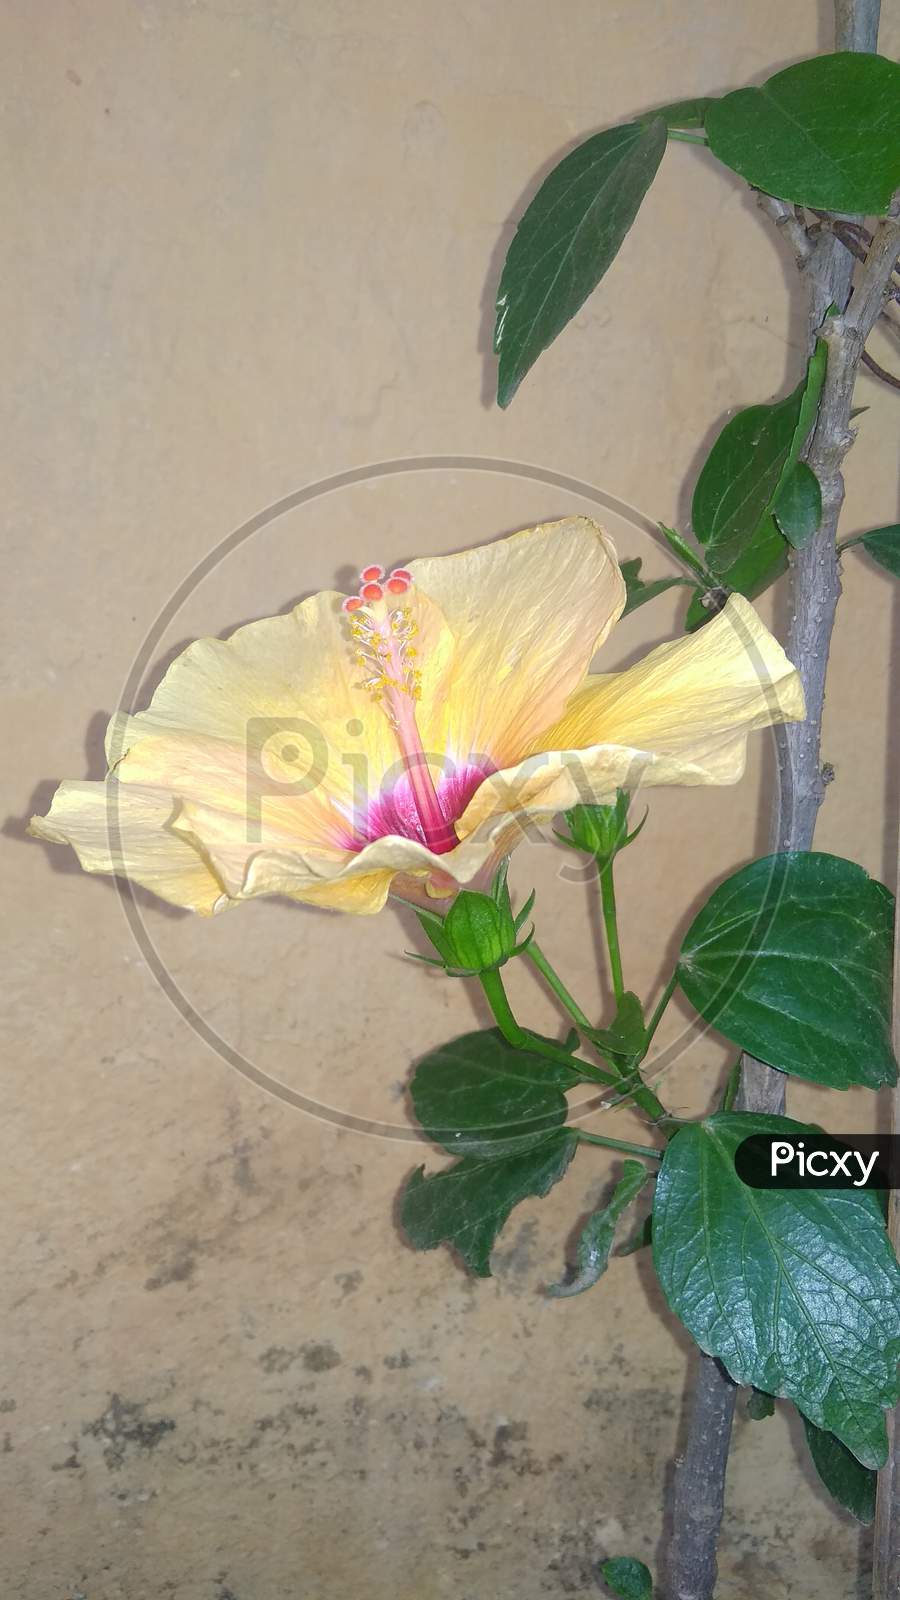 Chinese hibiscus yellow morning glory flowering plant close up image